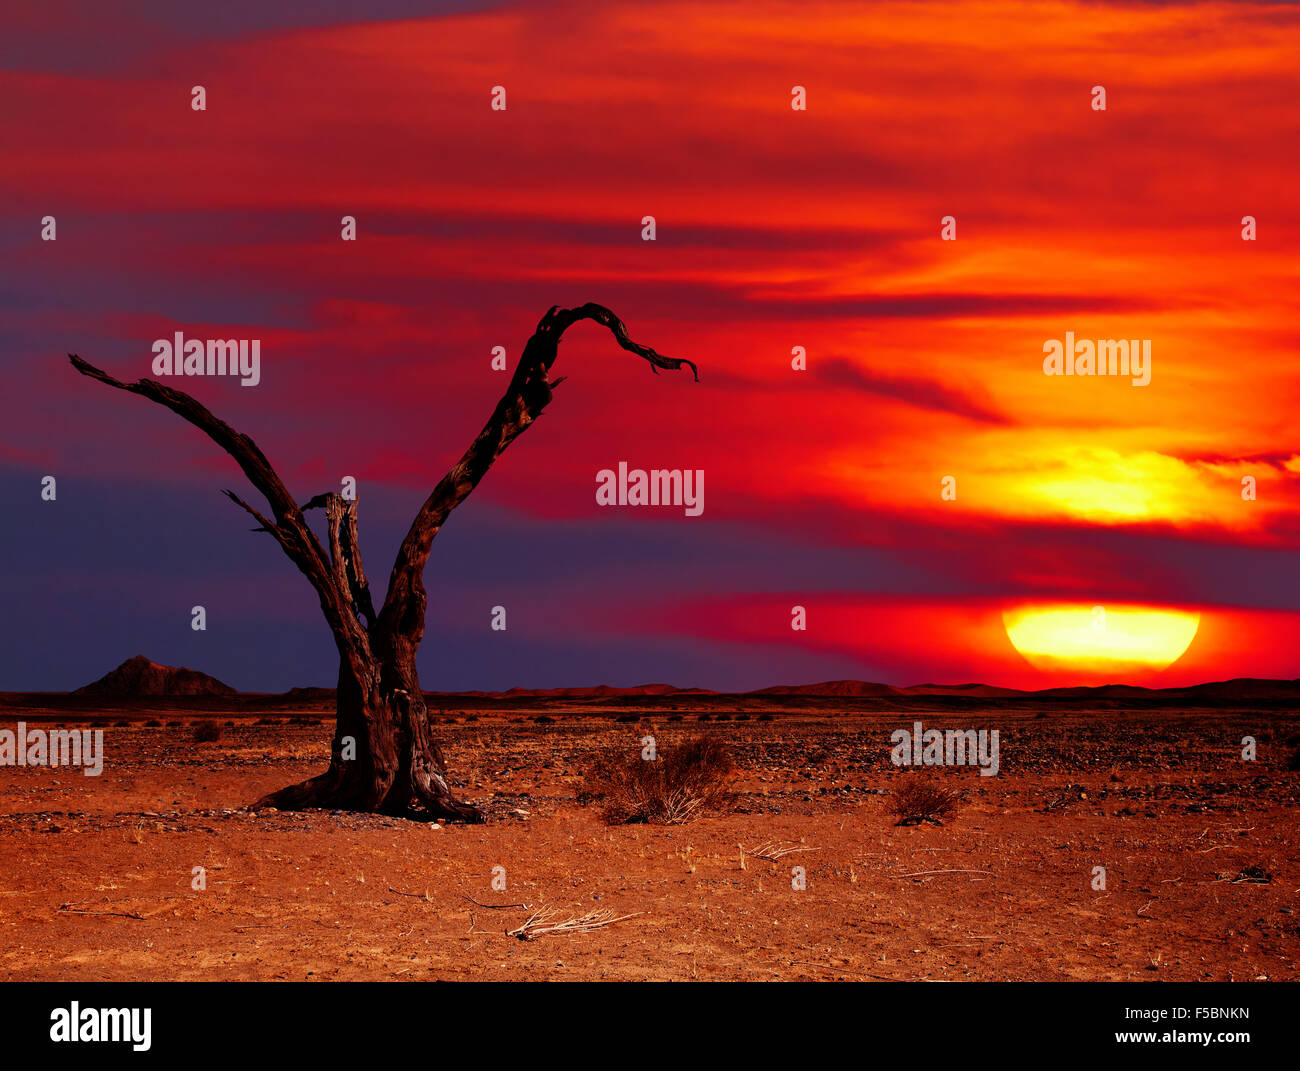 Desert landscape with dead tree at sunset Stock Photo